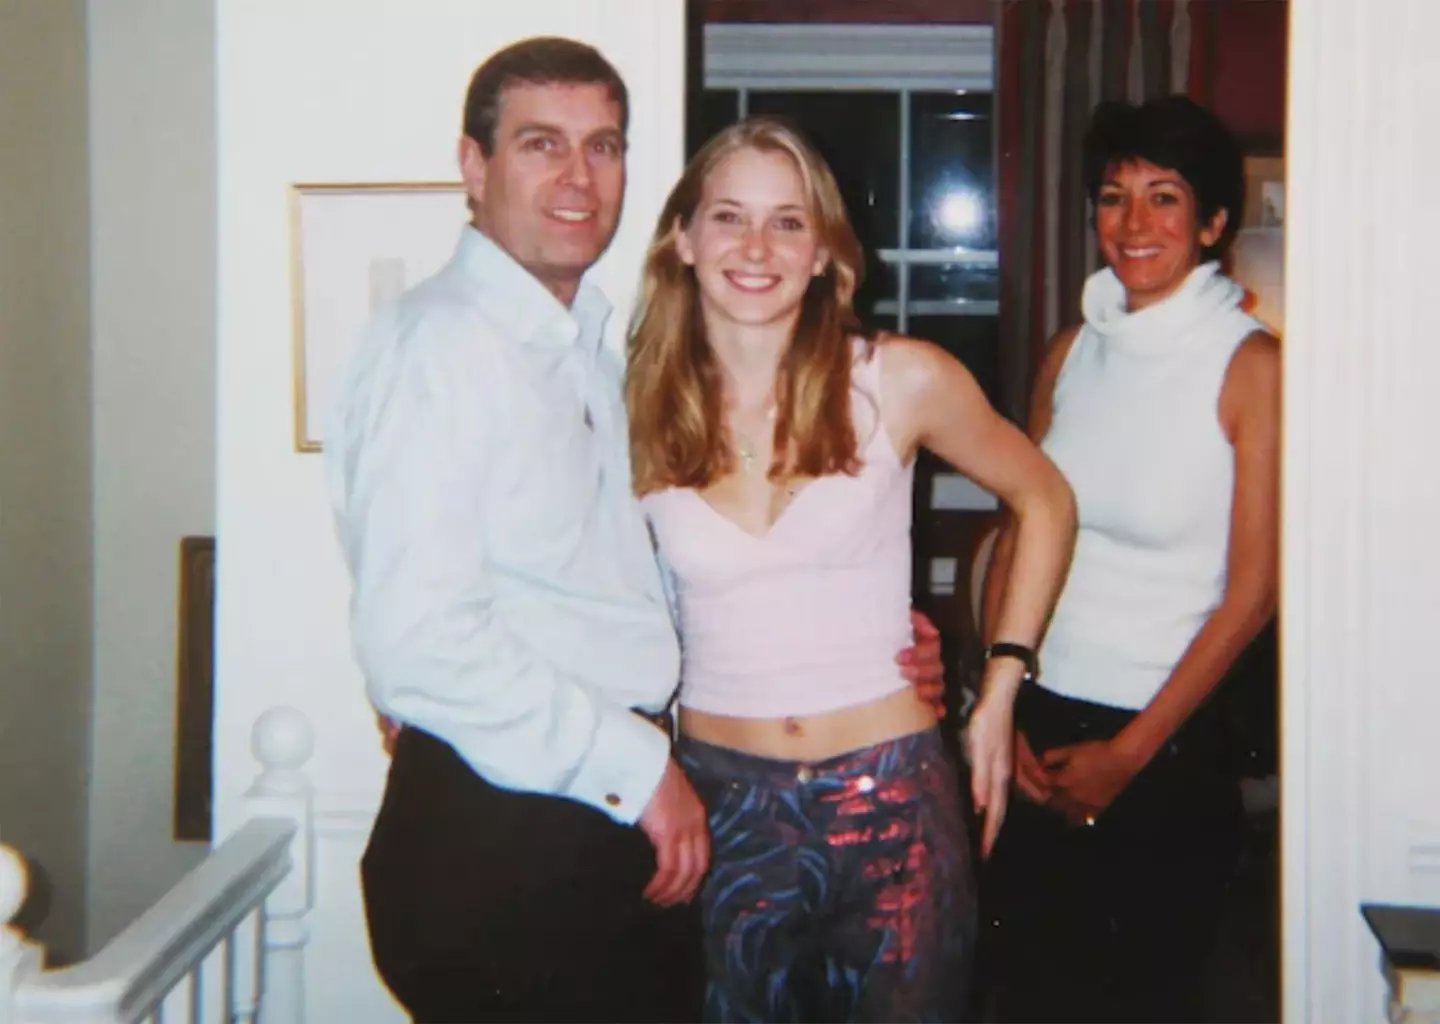 The disgraced royal was friends with Ghislaine Maxwell (right).